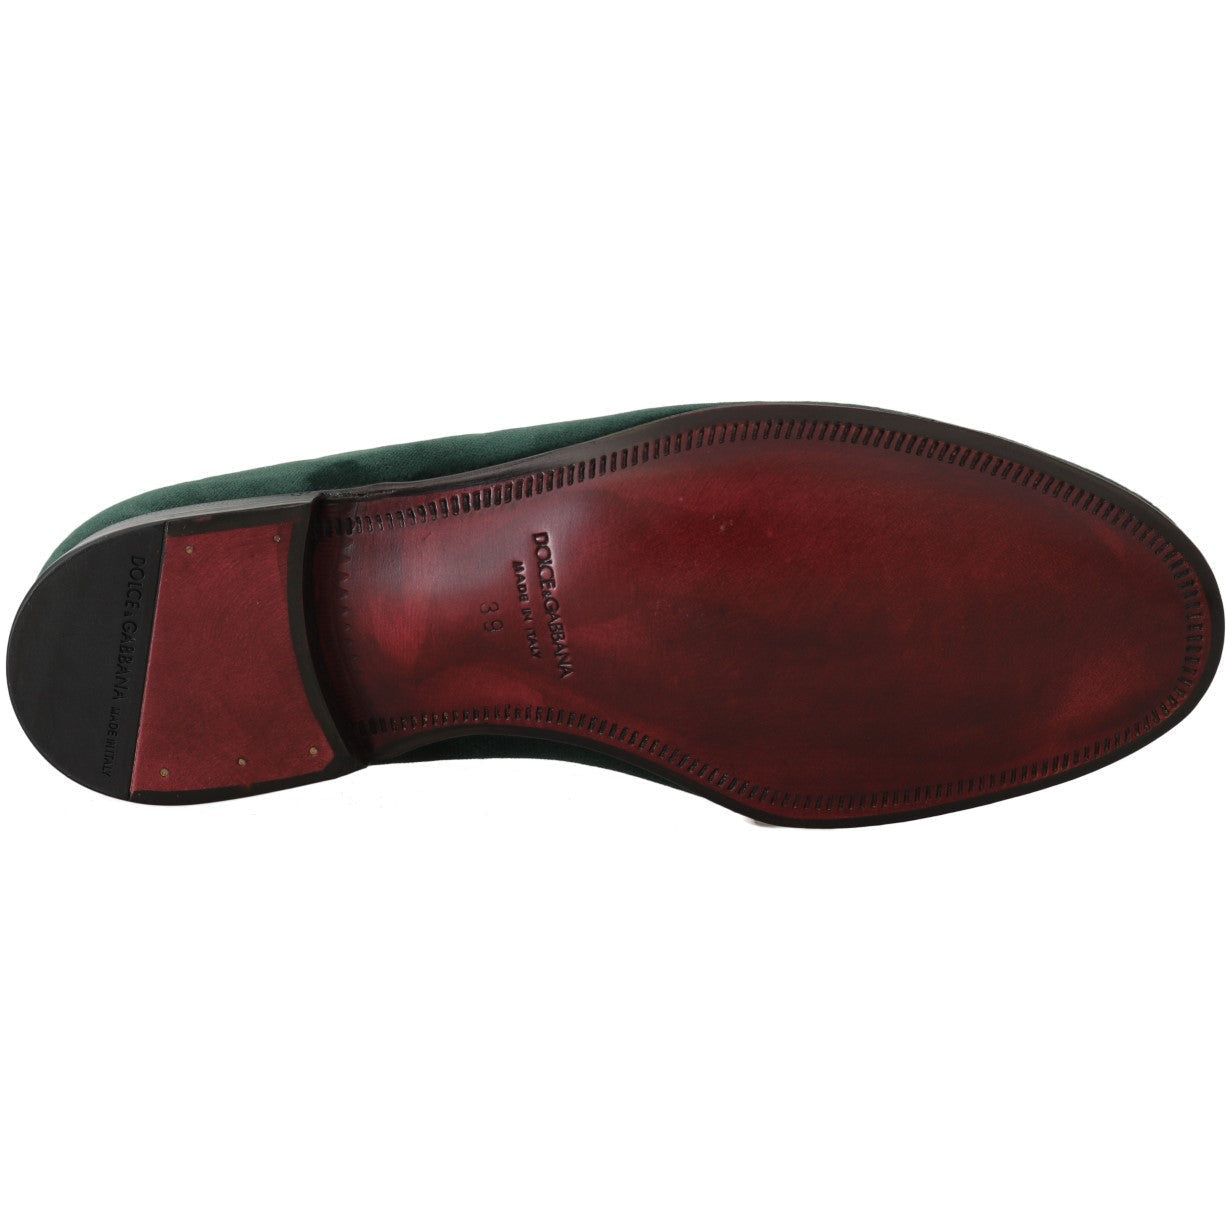 Dolce & Gabbana Elegant Green Suede Slip-On Loafers green-suede-leather-slippers-loafers